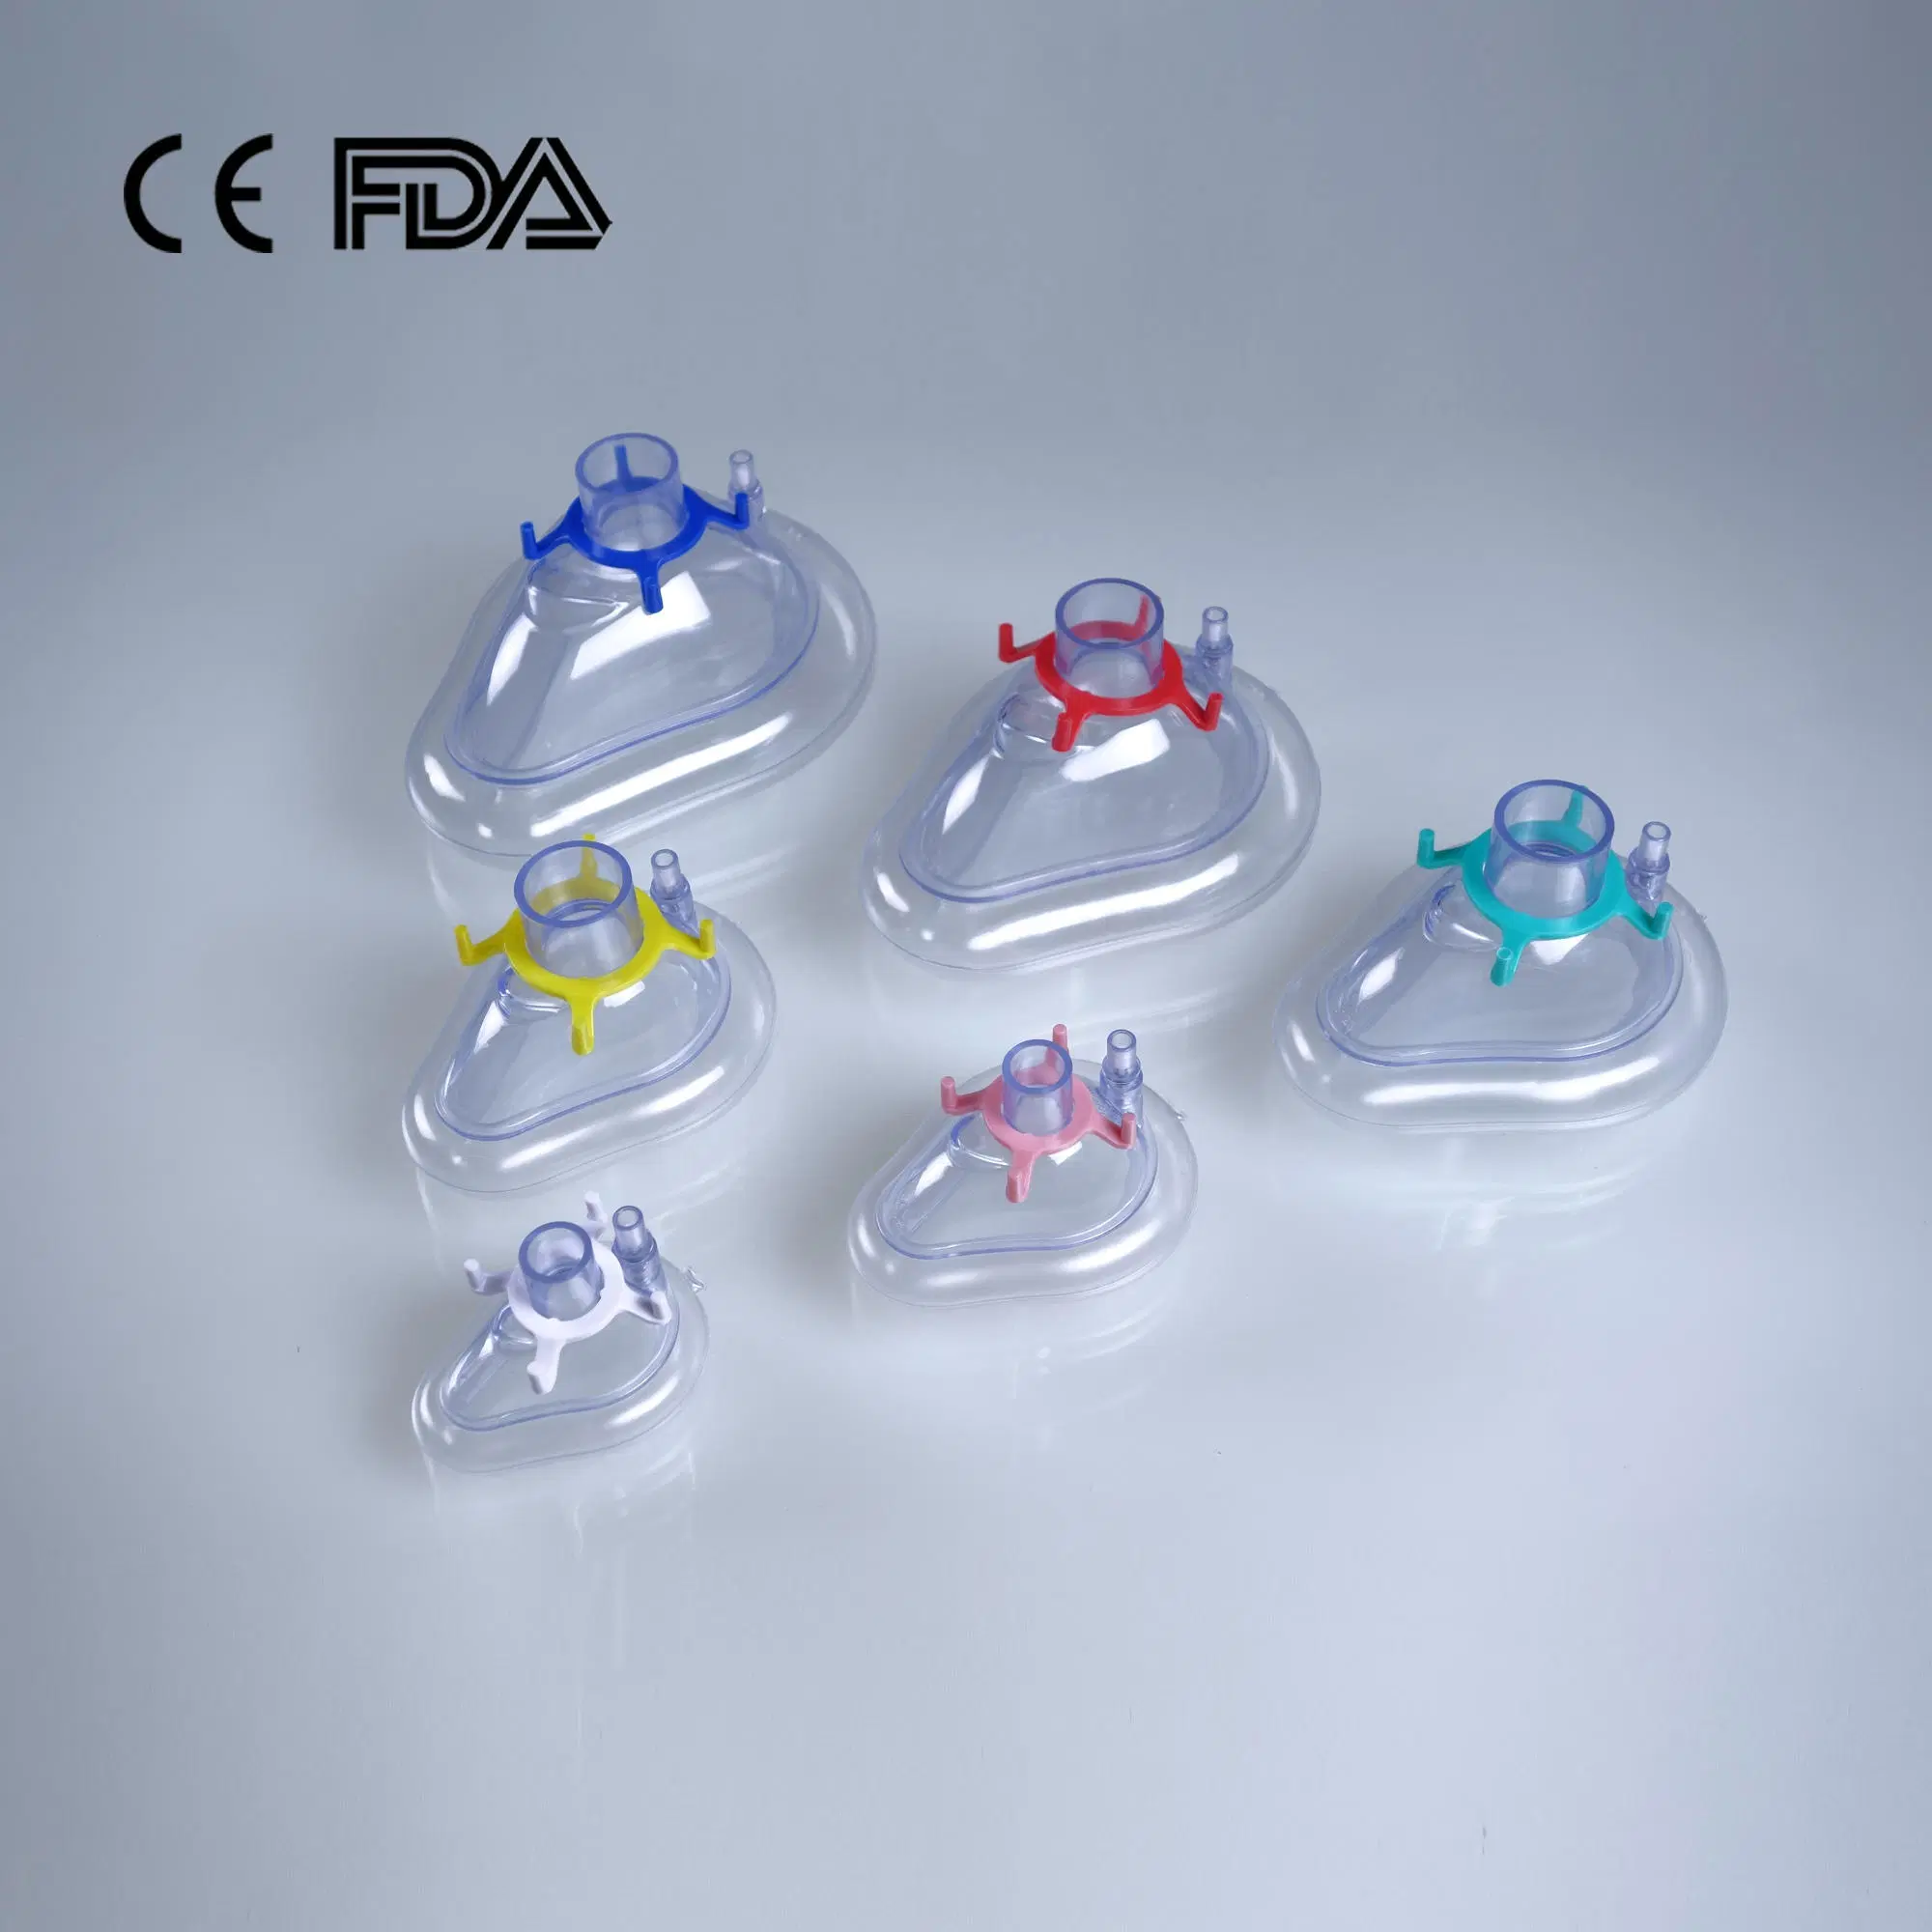 Disposable Medical Surgical PVC Air Cushion Anesthesia Mask with CE FDA